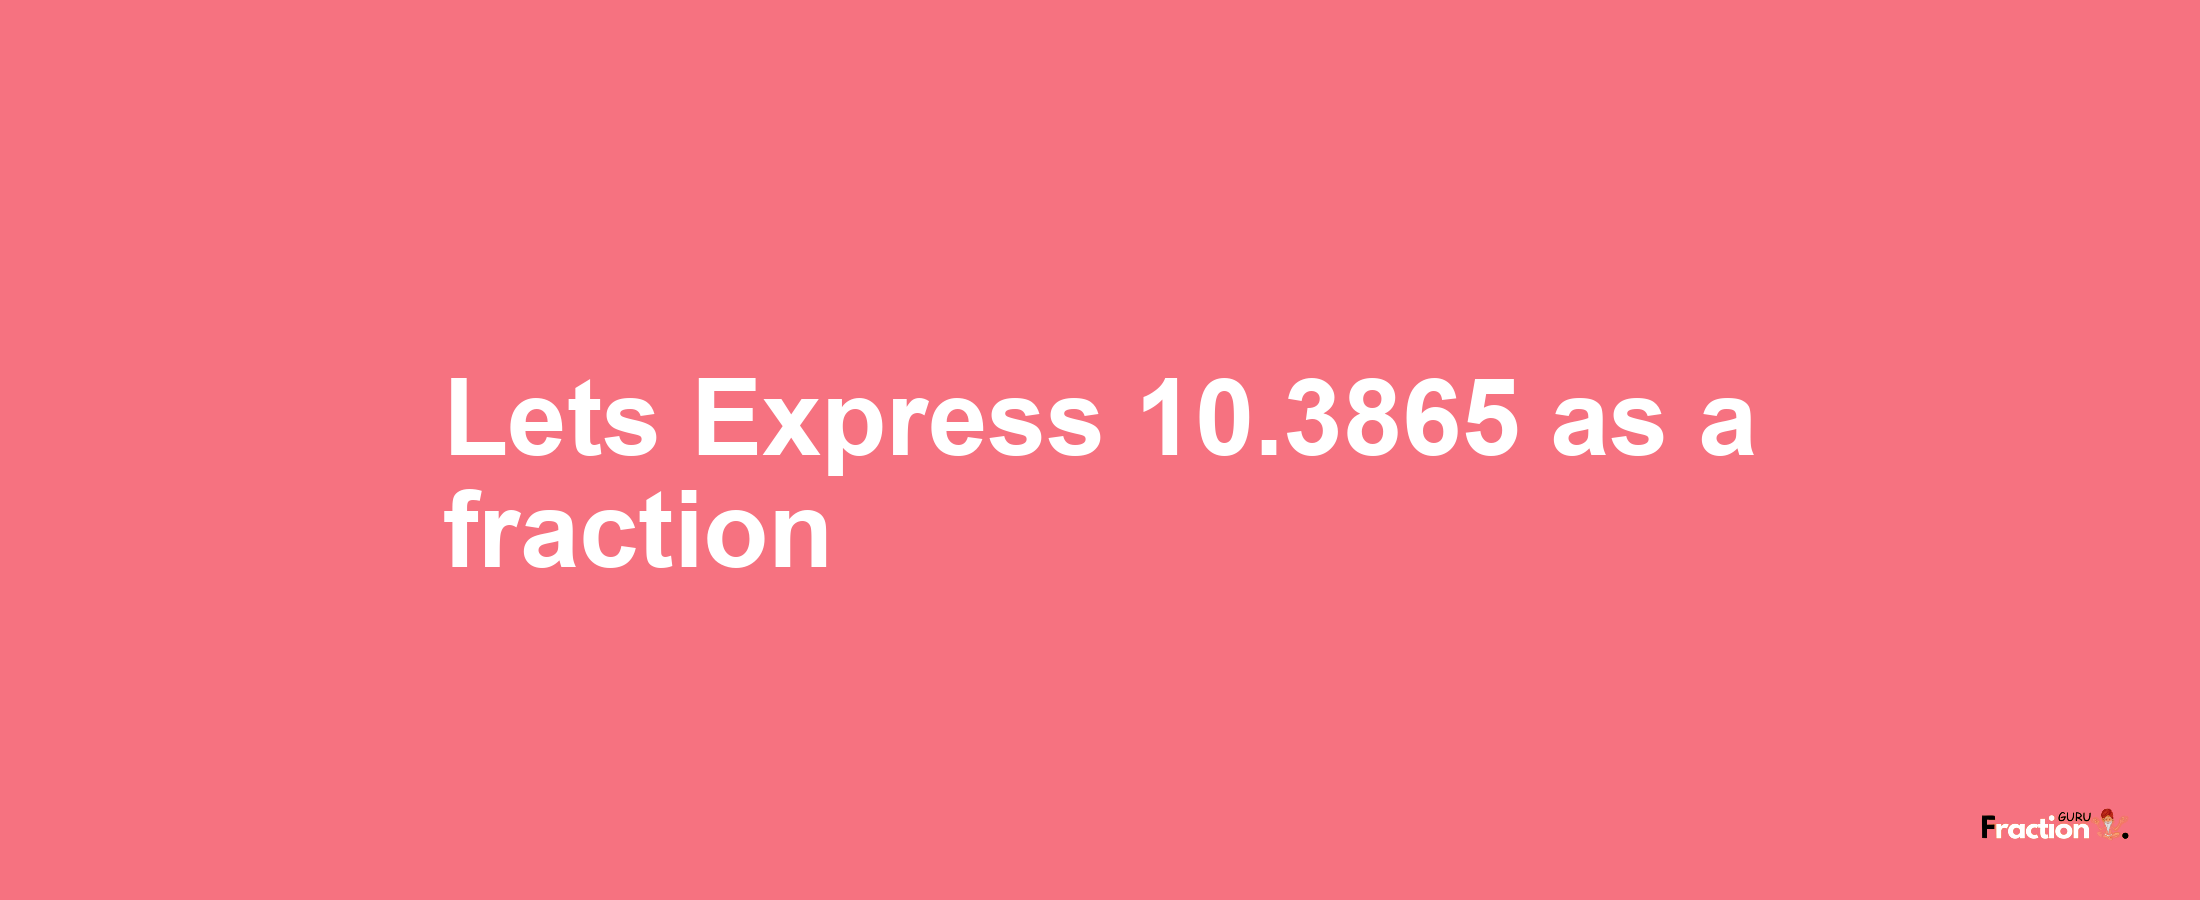 Lets Express 10.3865 as afraction